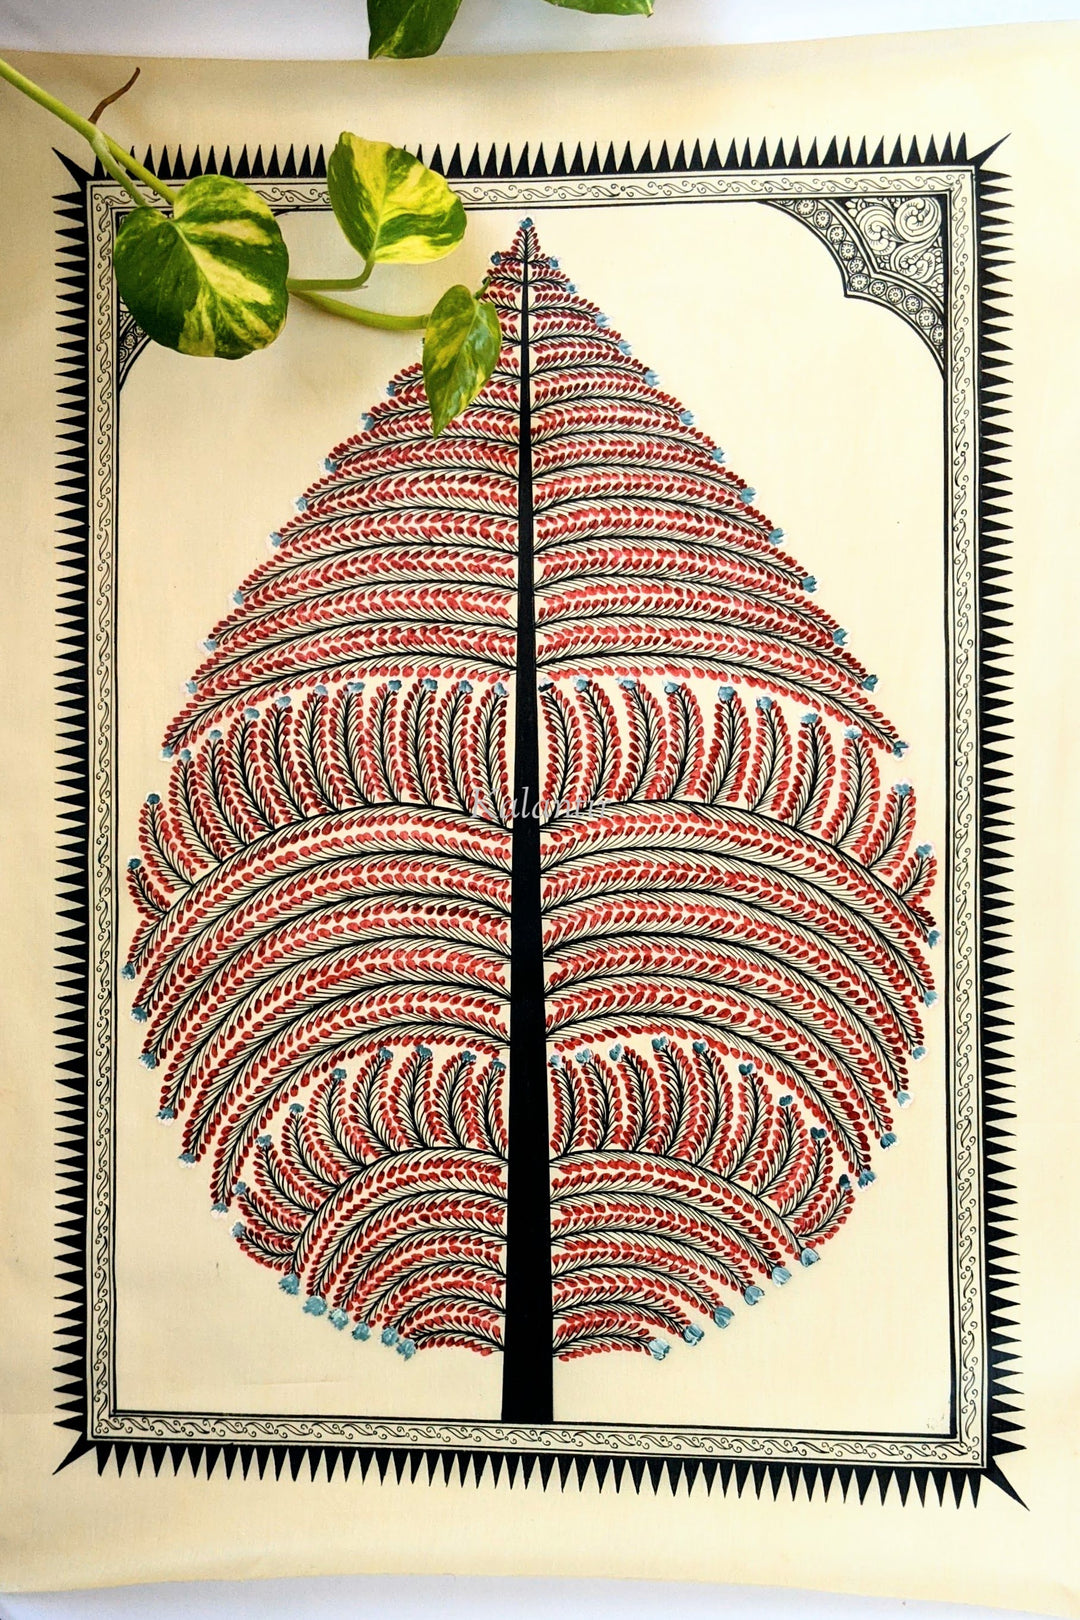 Tree of Life Saura Art in Red